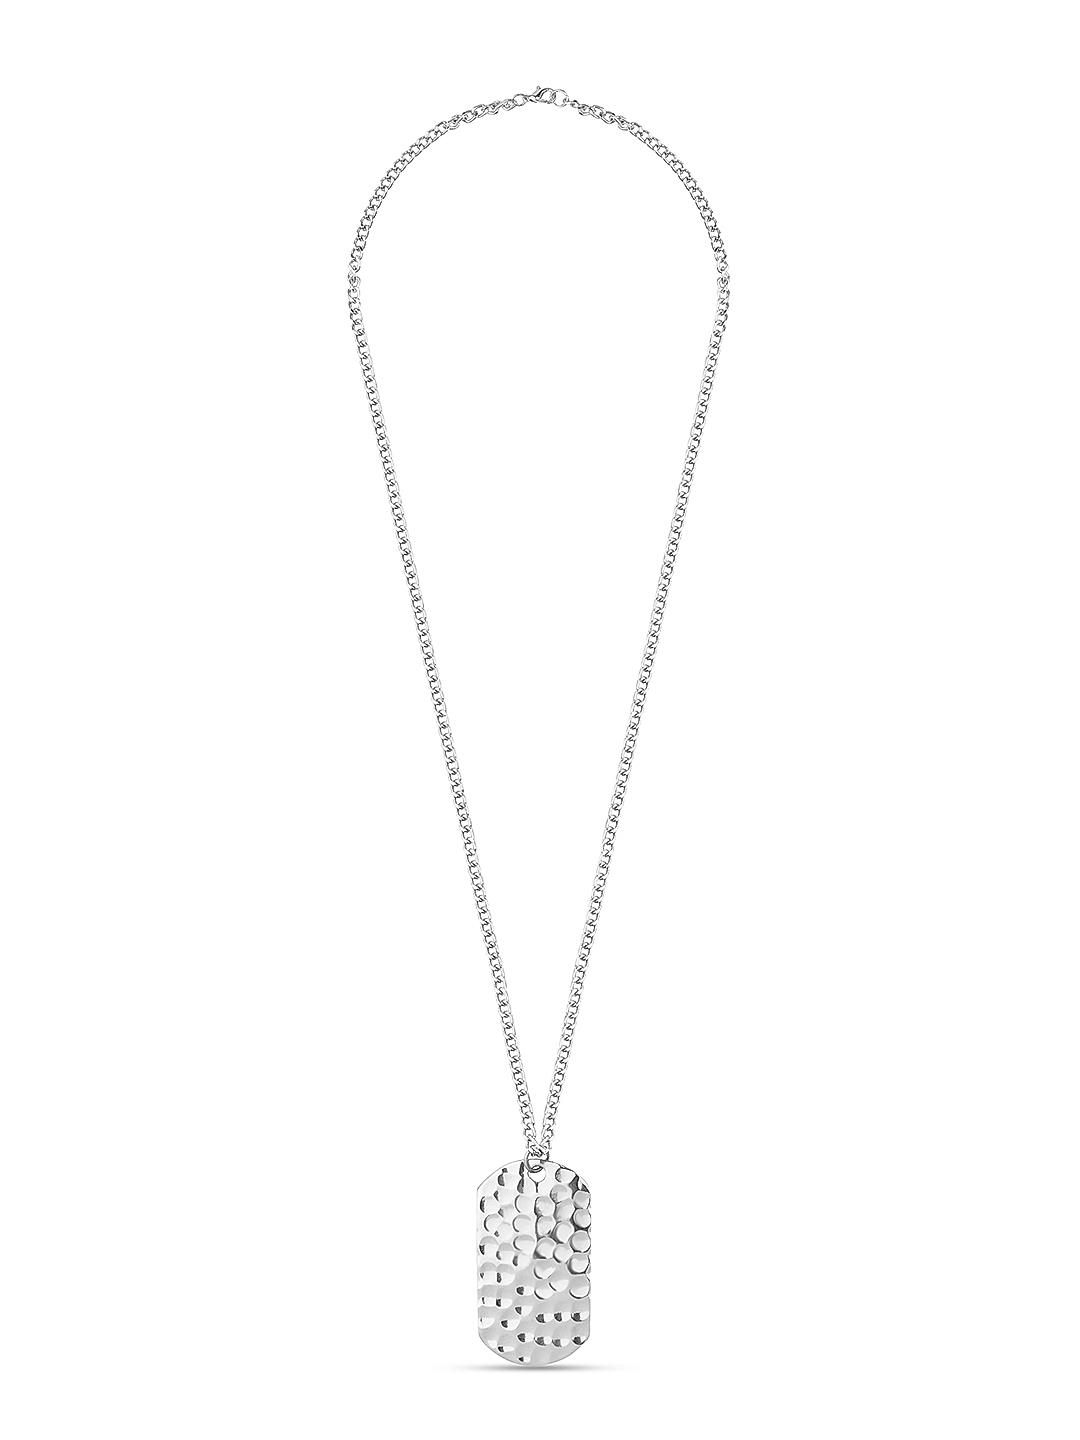 Silver Dog Tag Necklace with Diamonds - The Diamond Setter